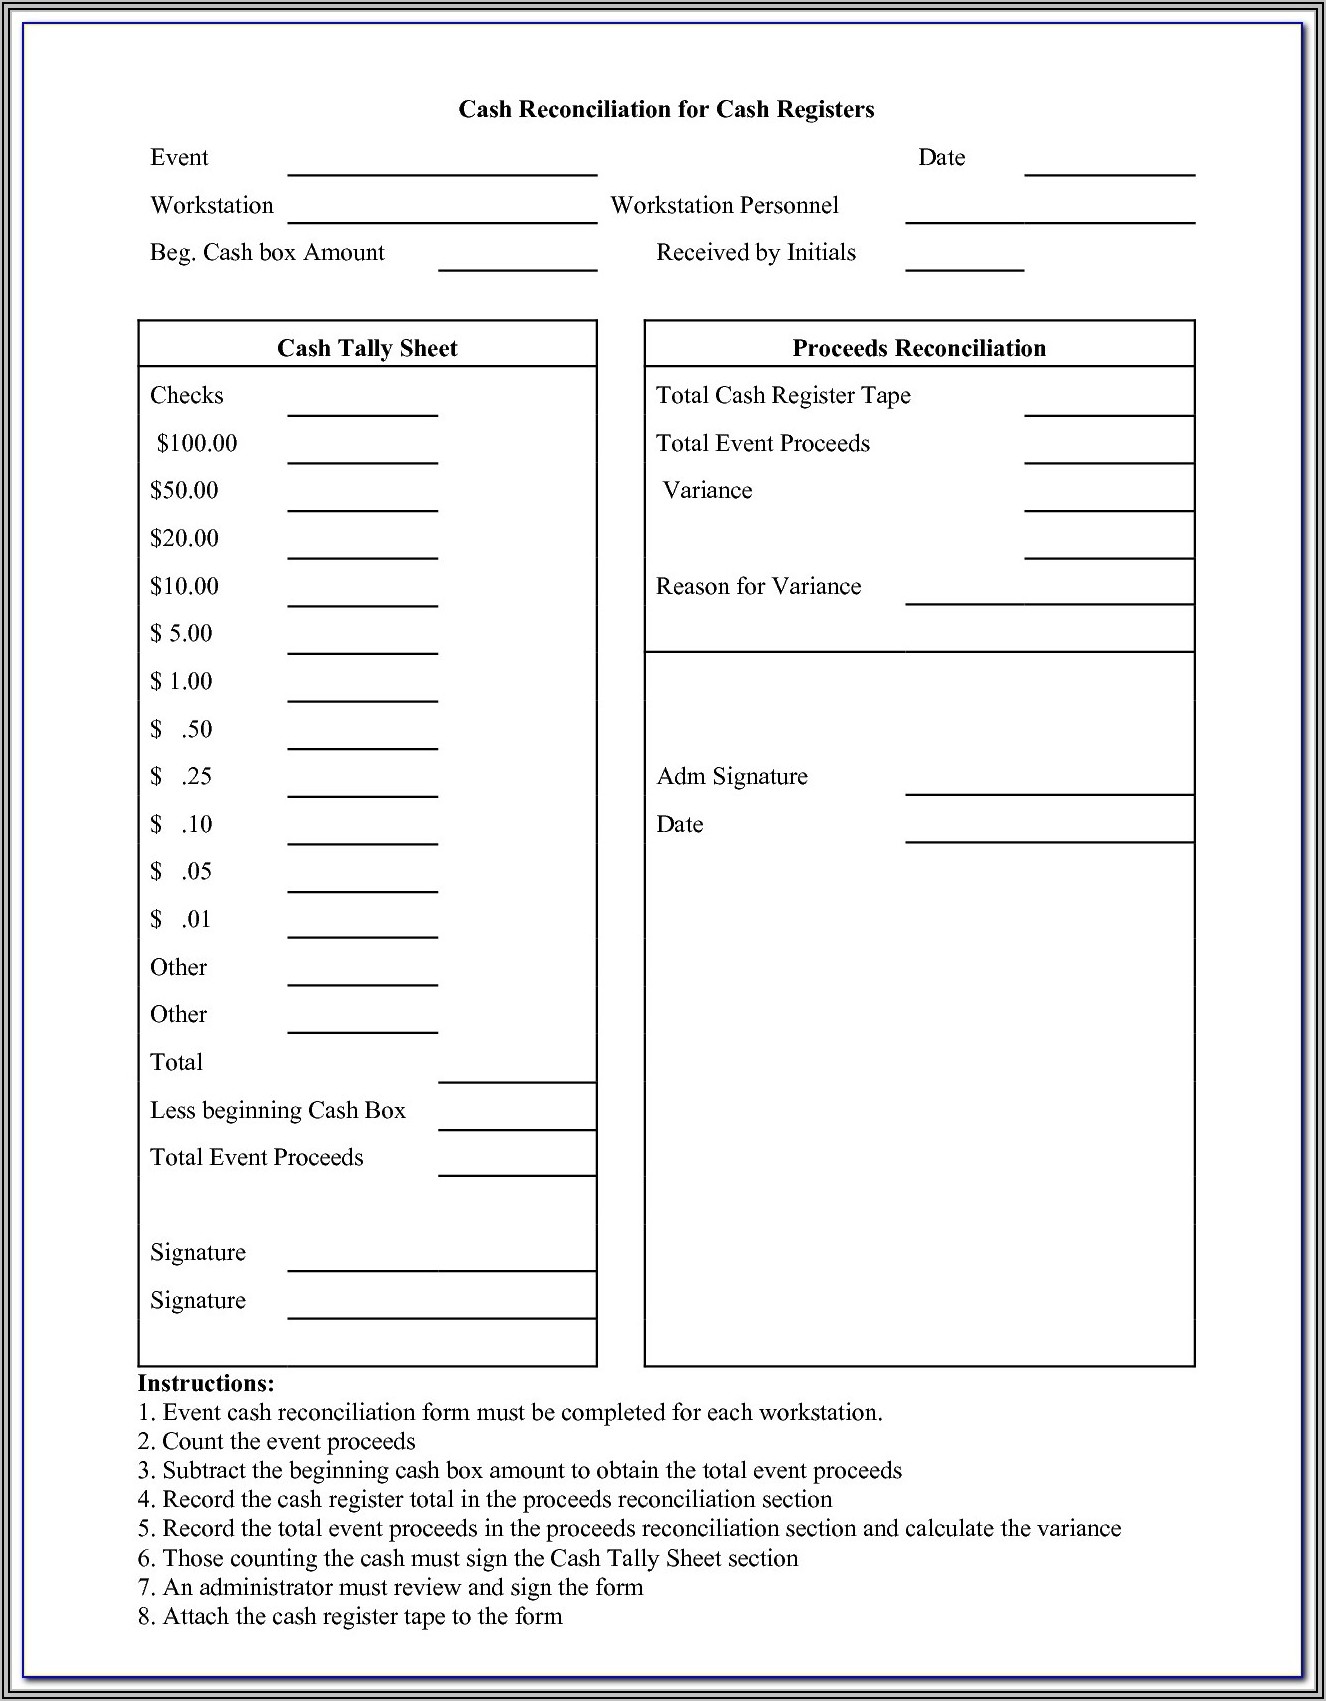 Fixed Asset Register Template Excel Free